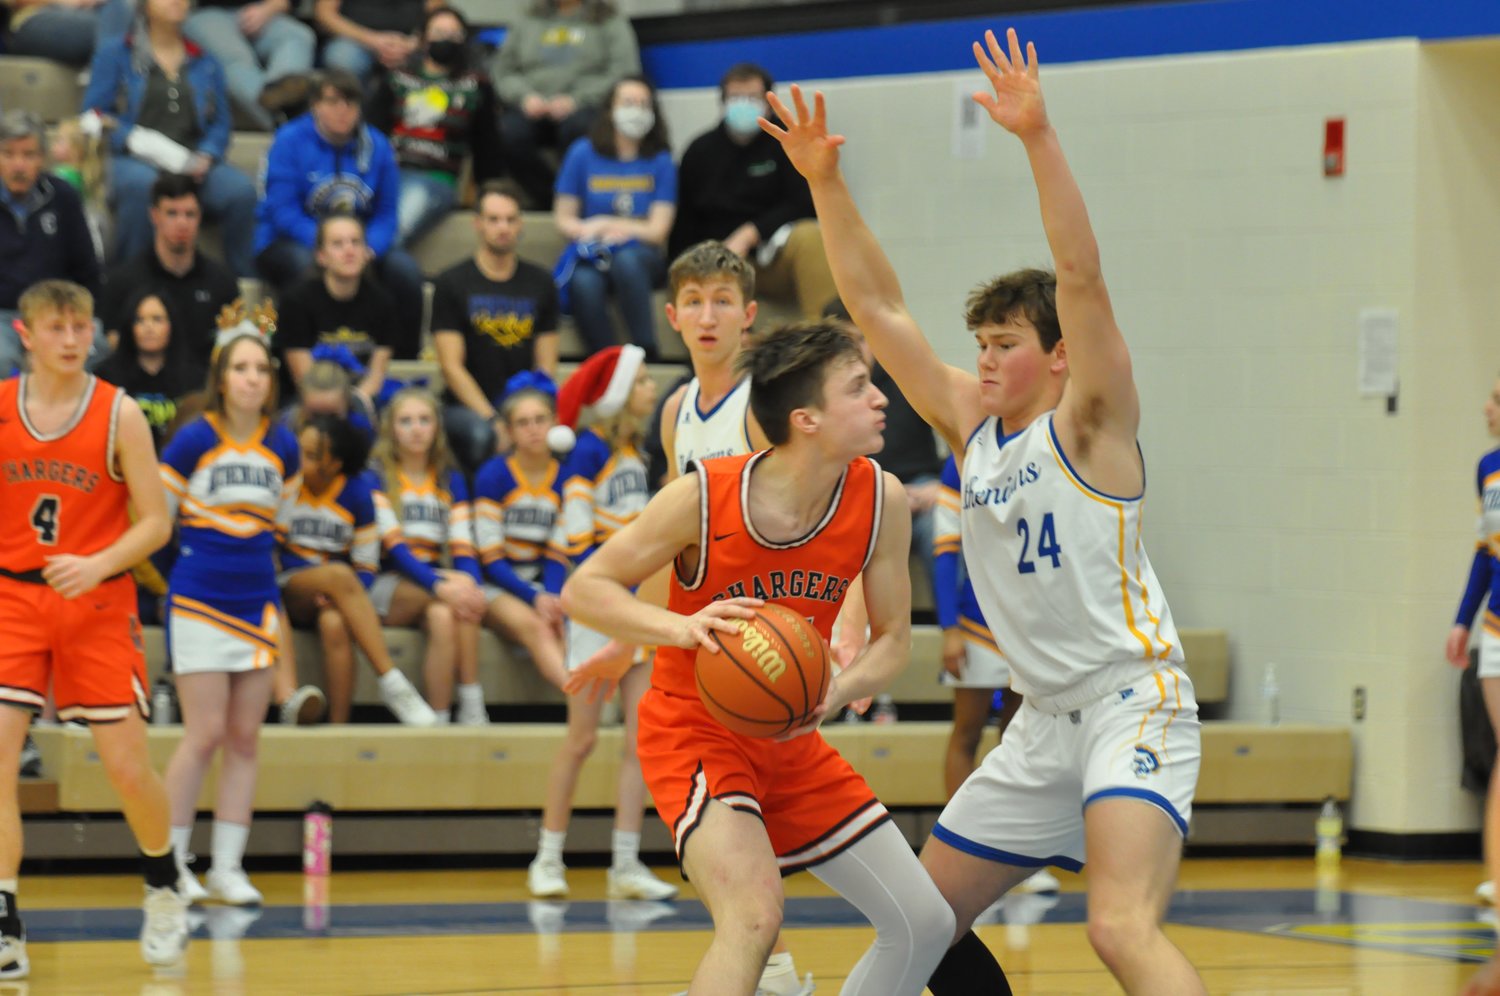 North Montgomery and Crawfordsville will re-new their county rivalry on Friday night with the girls taking the court at 6 followed by the boys.